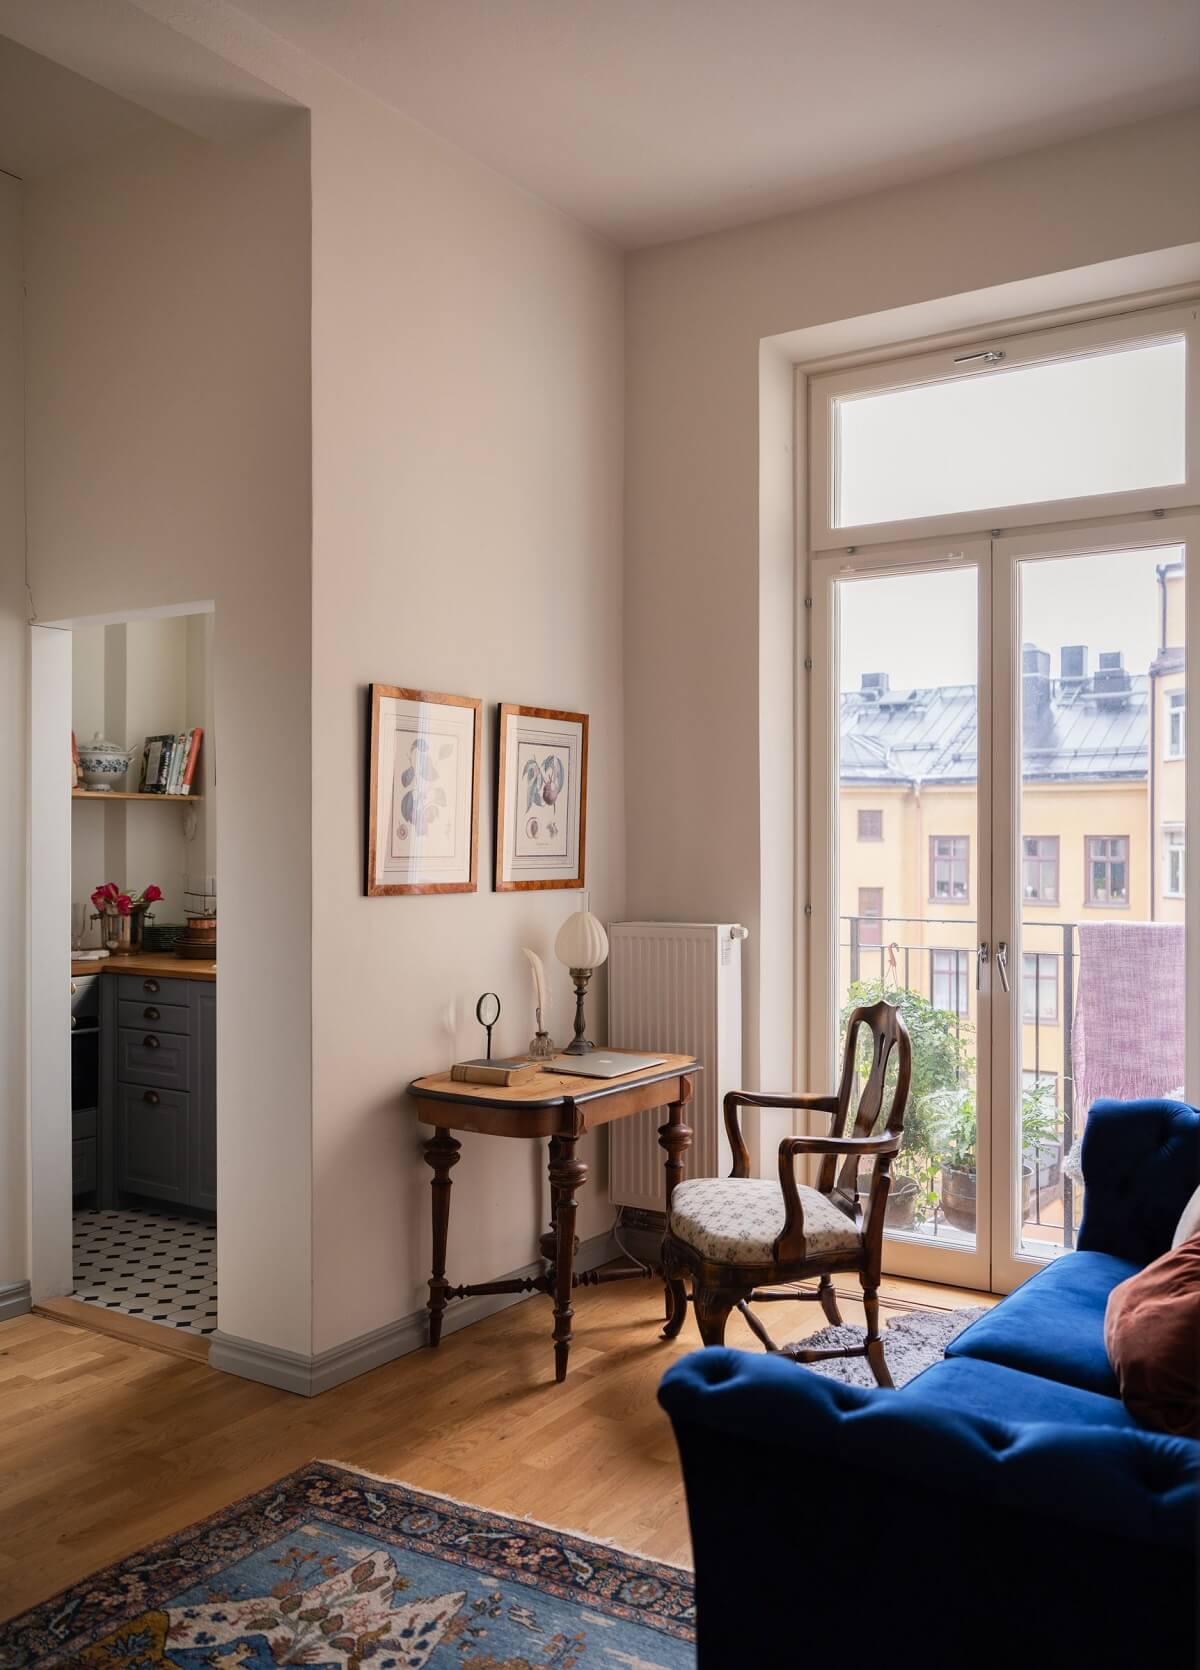 A Tiny Apartment with Antique Furniture